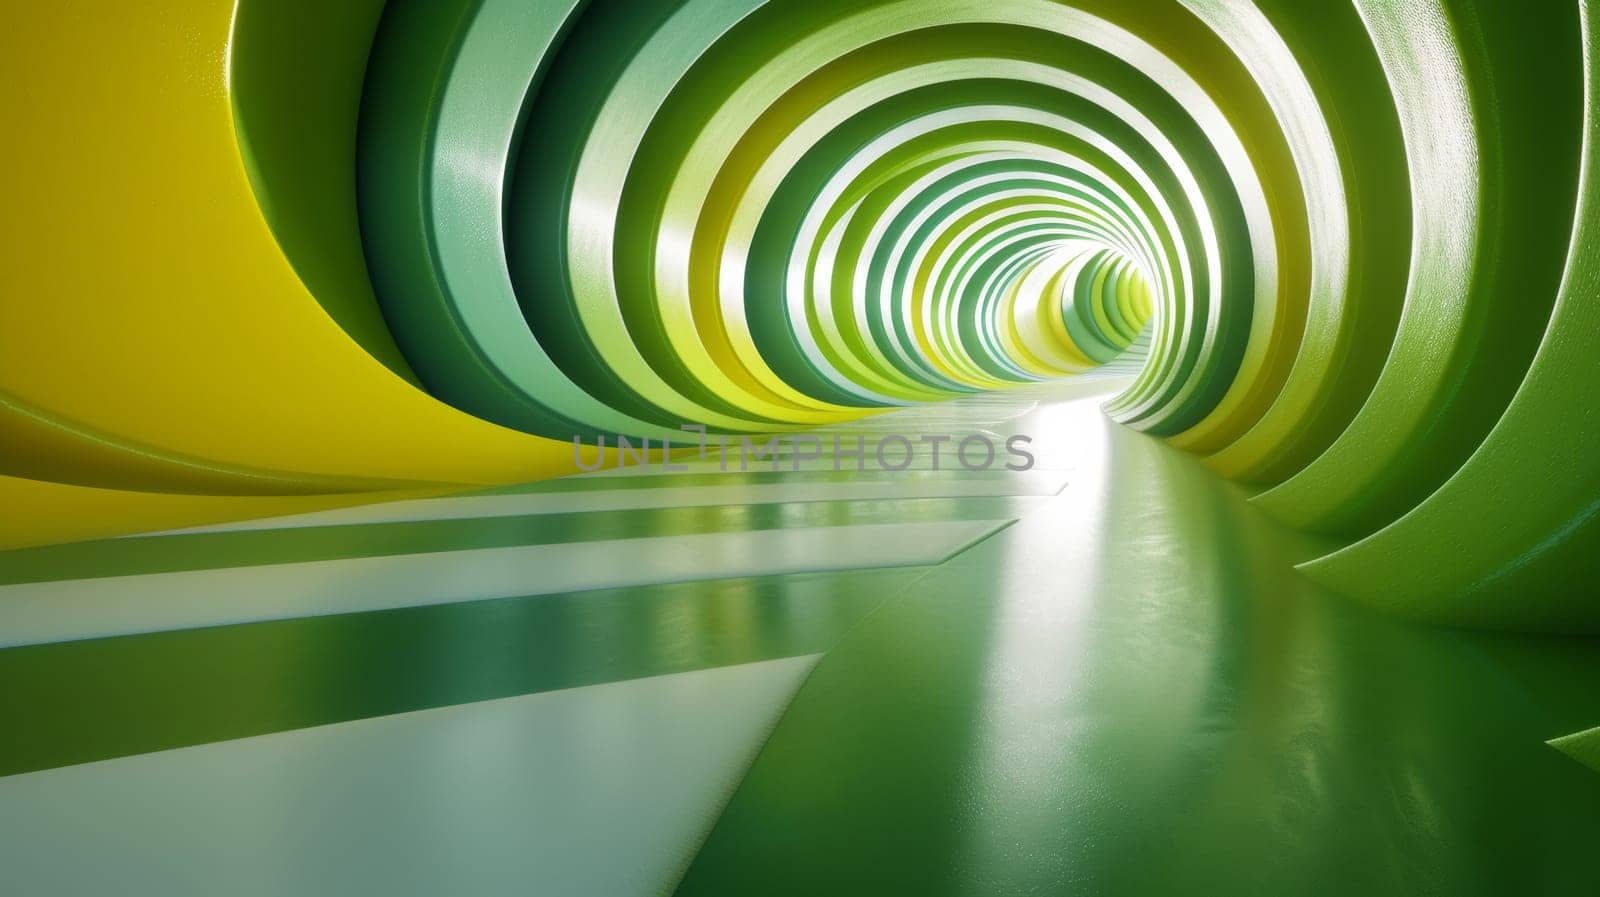 A green and yellow colored tunnel with a white stripe